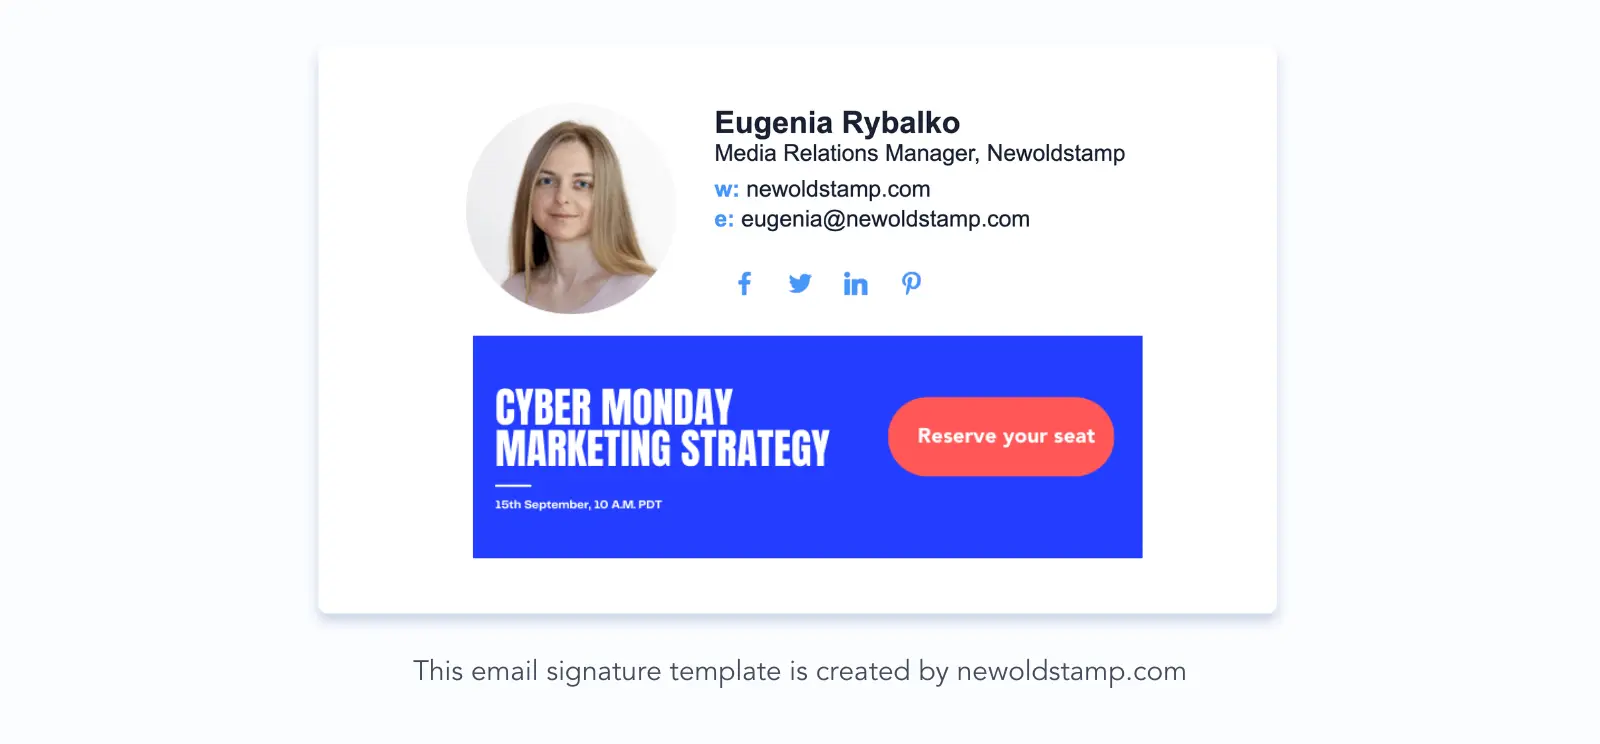 Email signature to generate leads